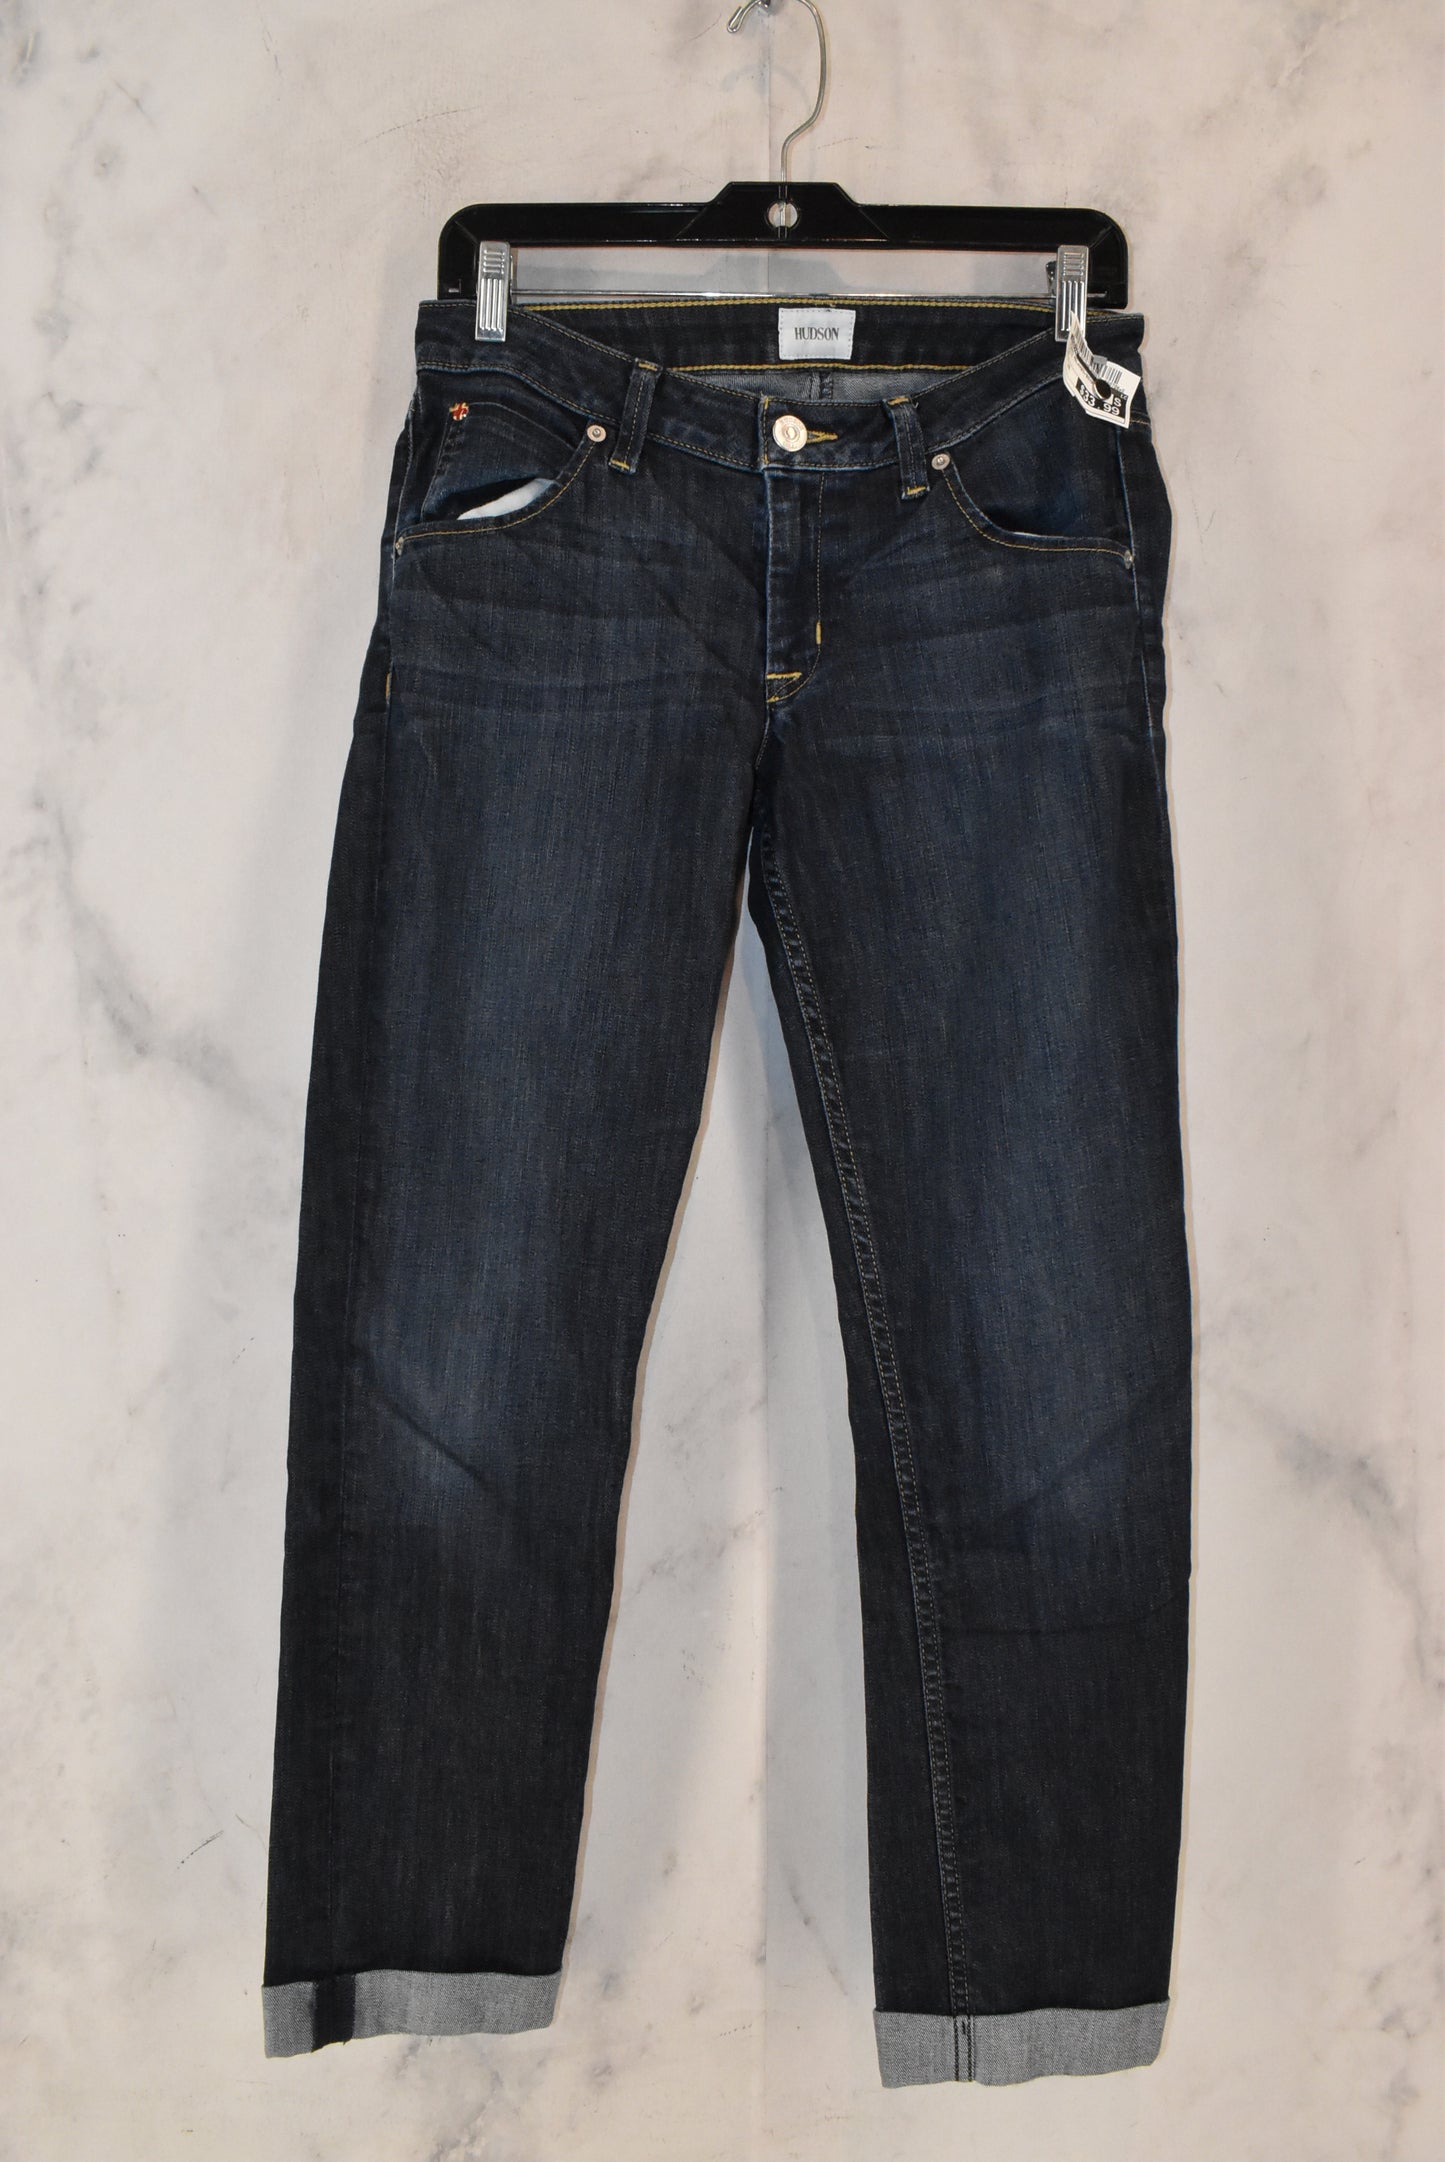 Jeans Relaxed/boyfriend By Hudson  Size: 28